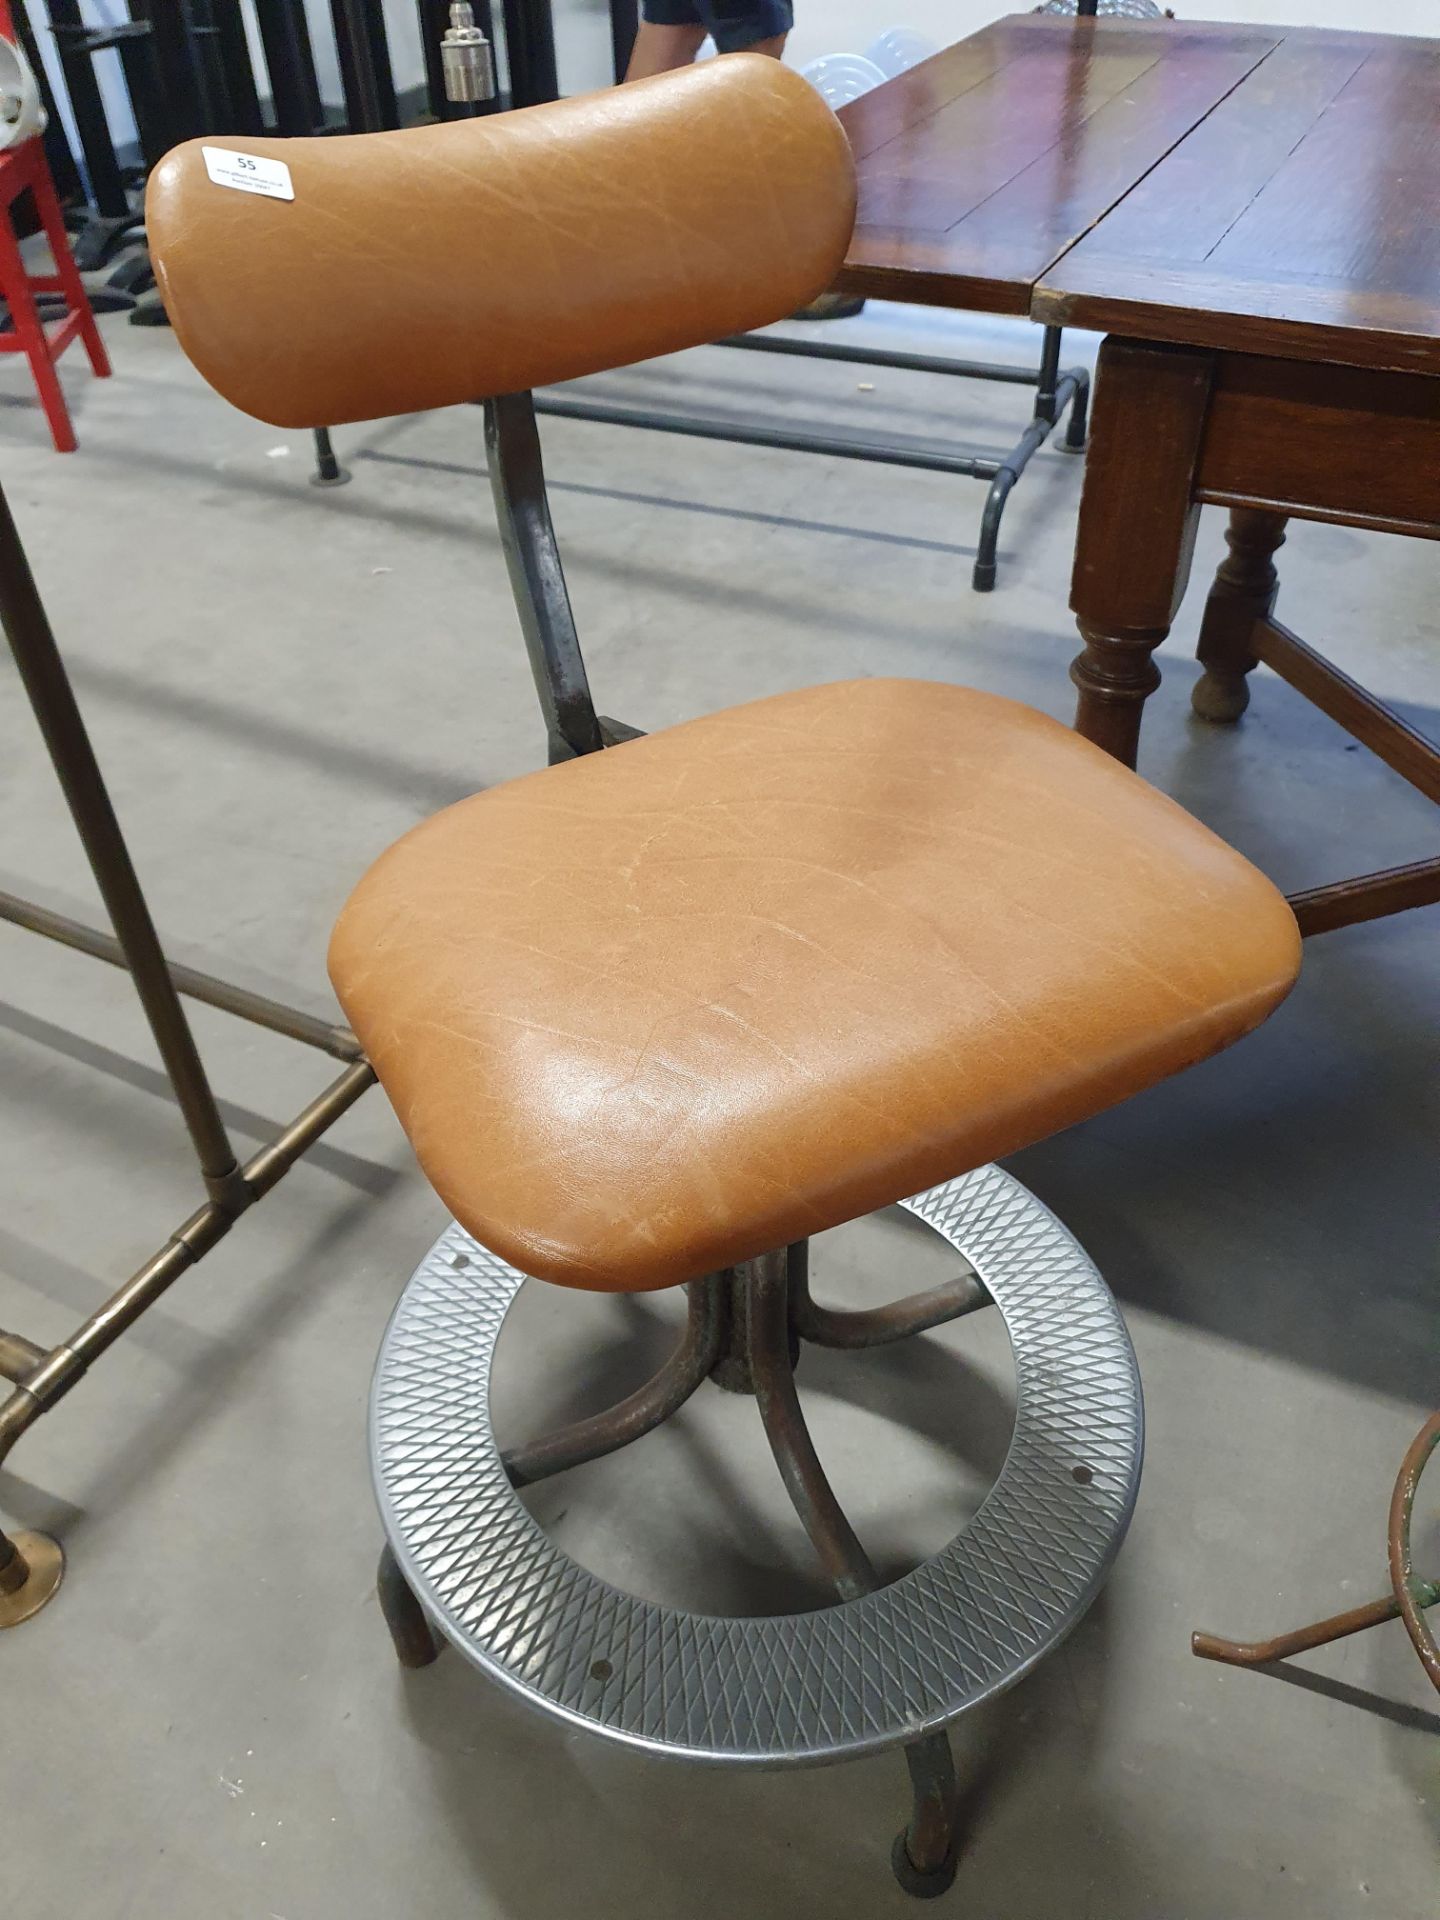 * industrial machinists style chair - Image 2 of 2